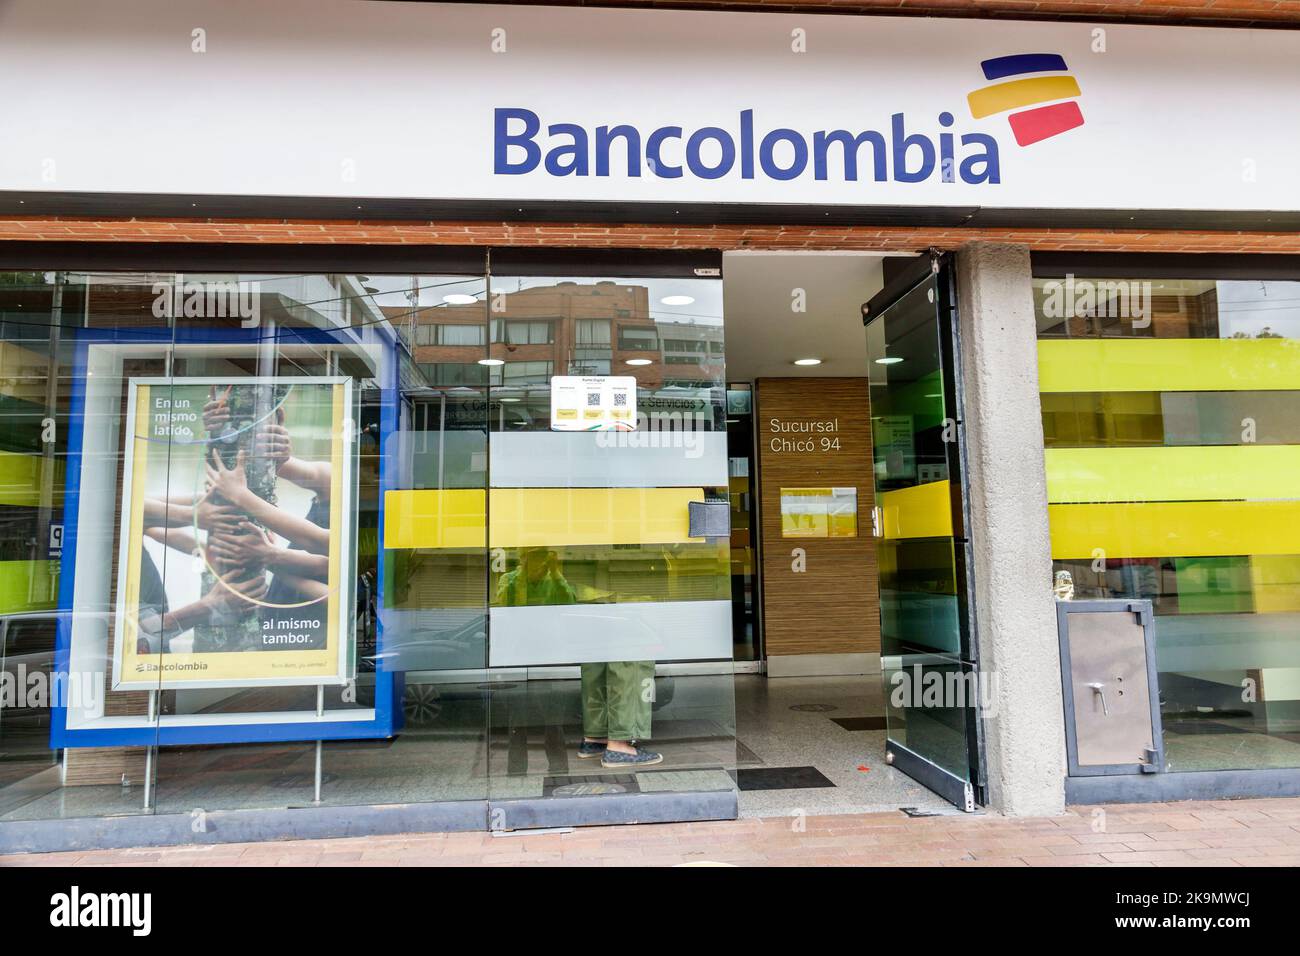 Bogota Colombia,El Chico Carrera 13,Bancolombia bank economy outside exterior front entrance,sign billboard information promoting promotion advertisin Stock Photo